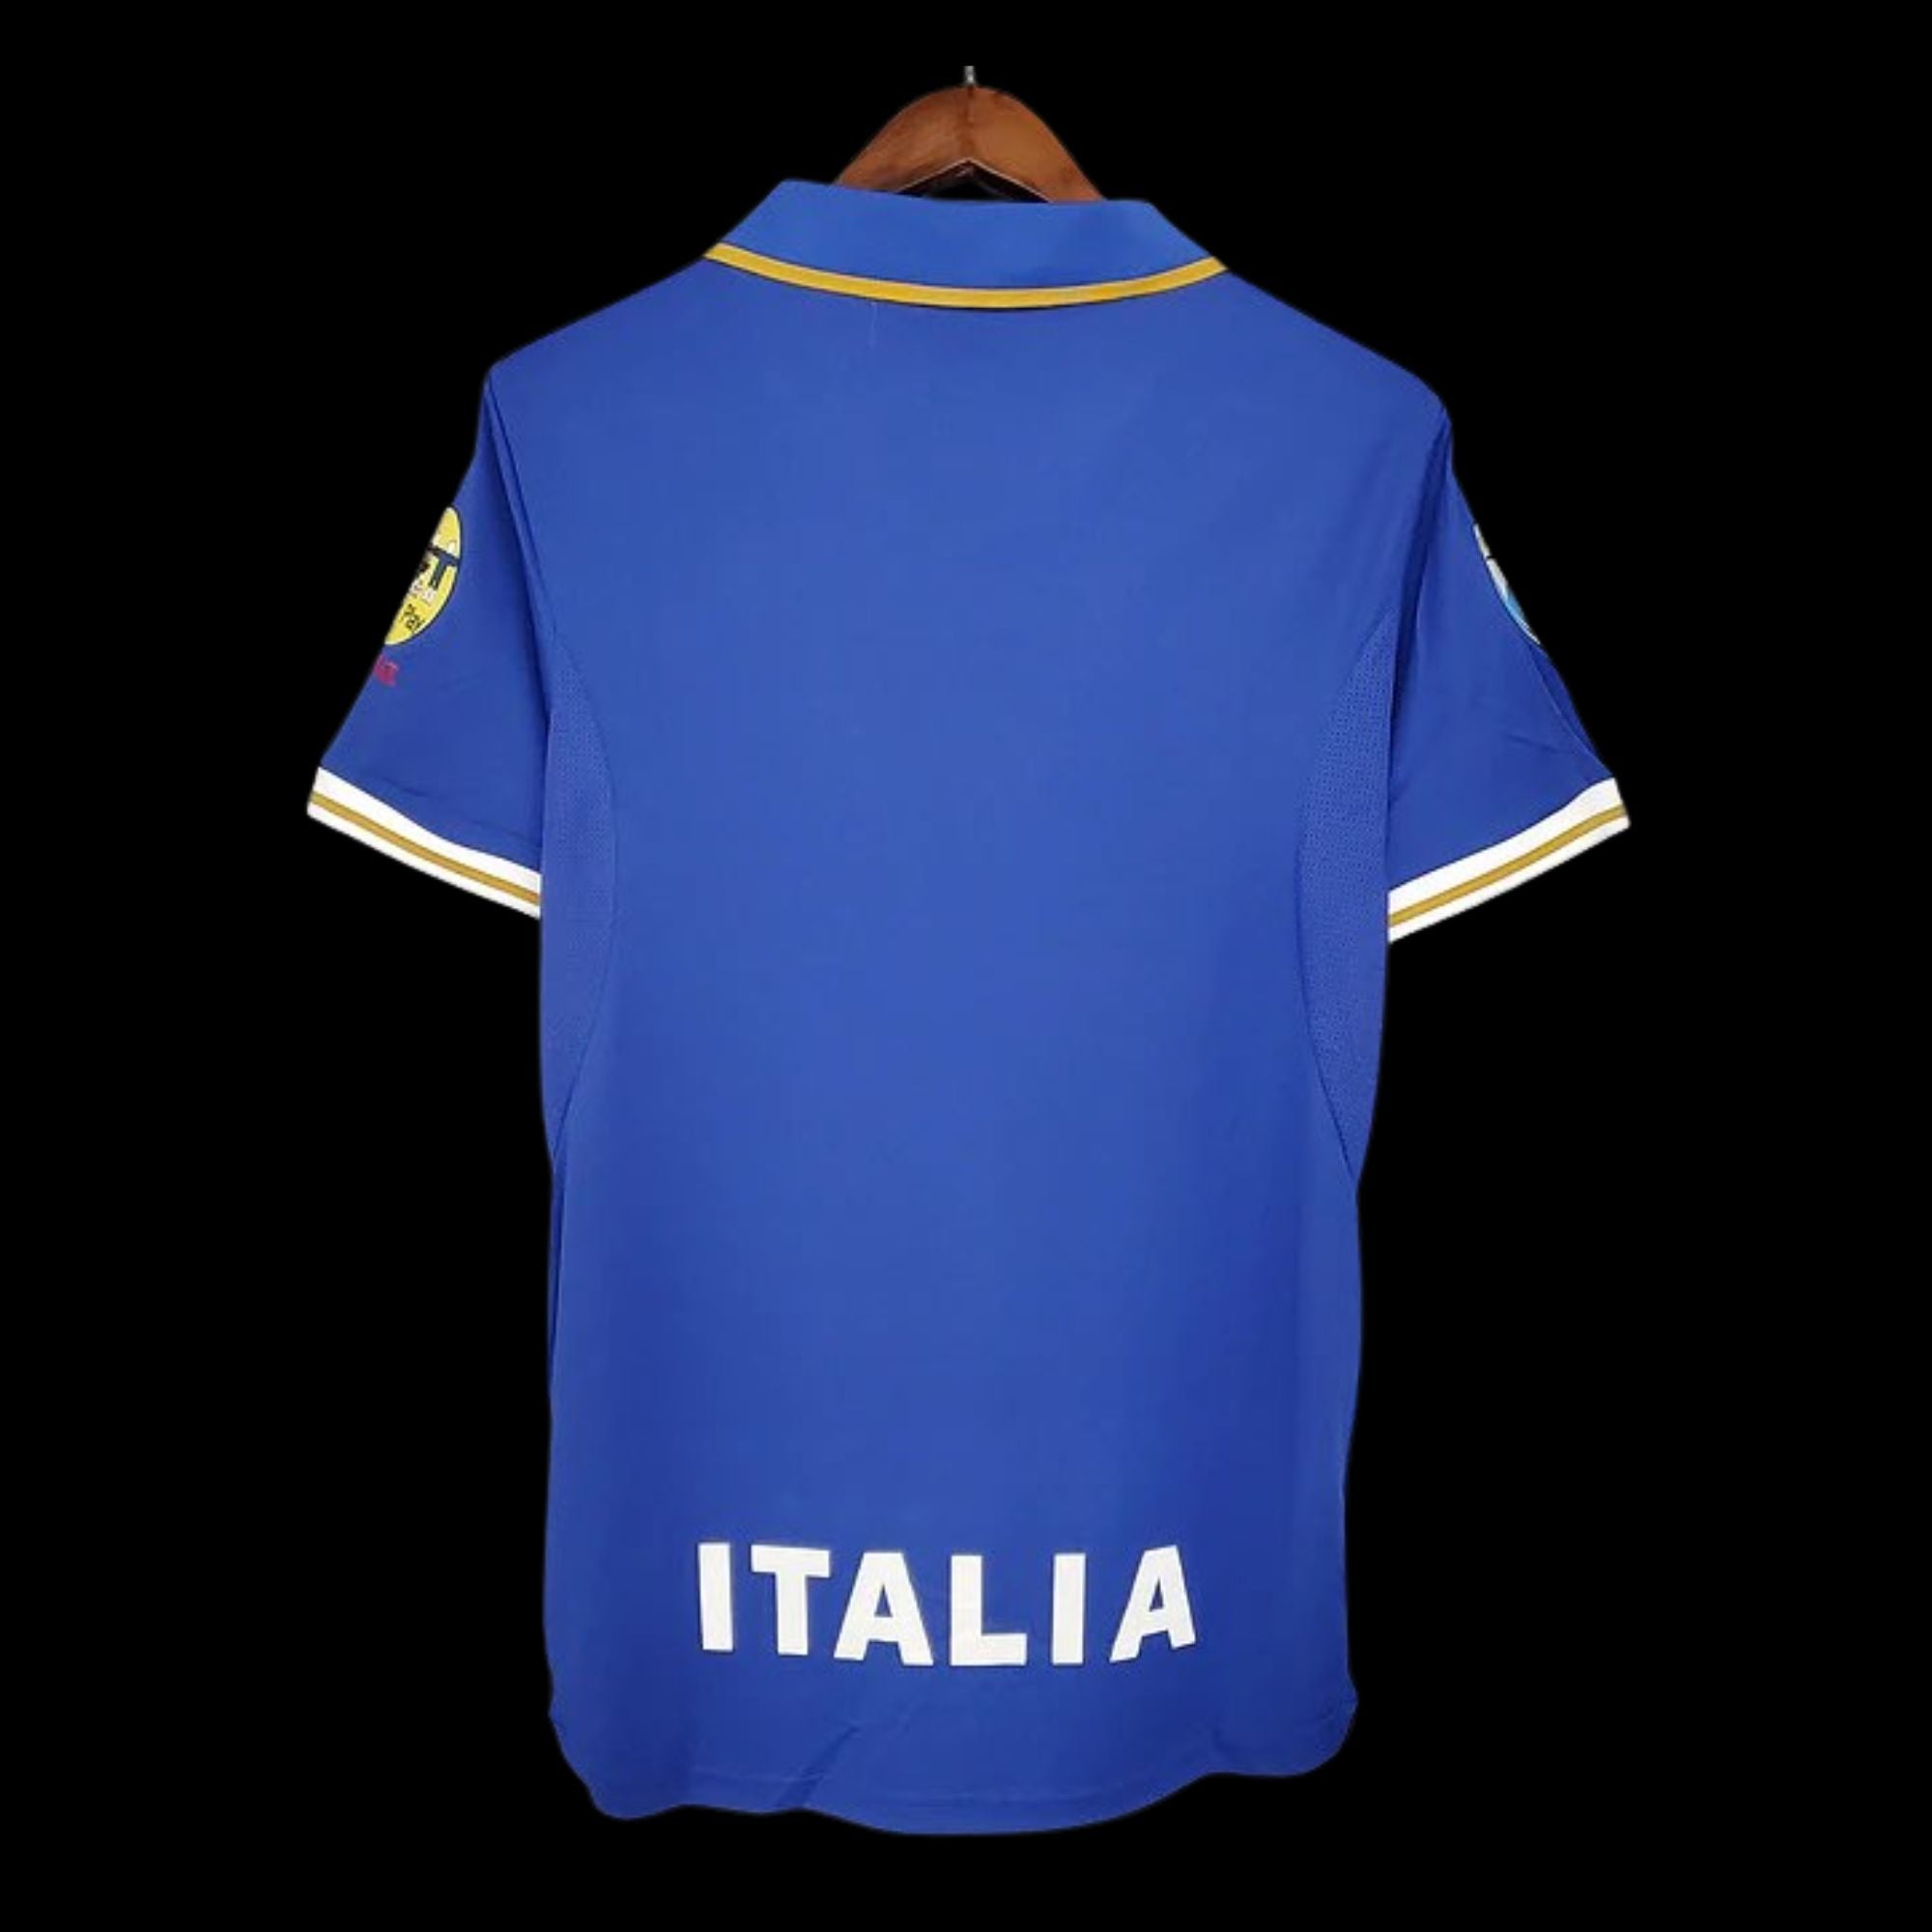 Retro 1994 Italy Football Shirt With/without Baggio 10 Named 